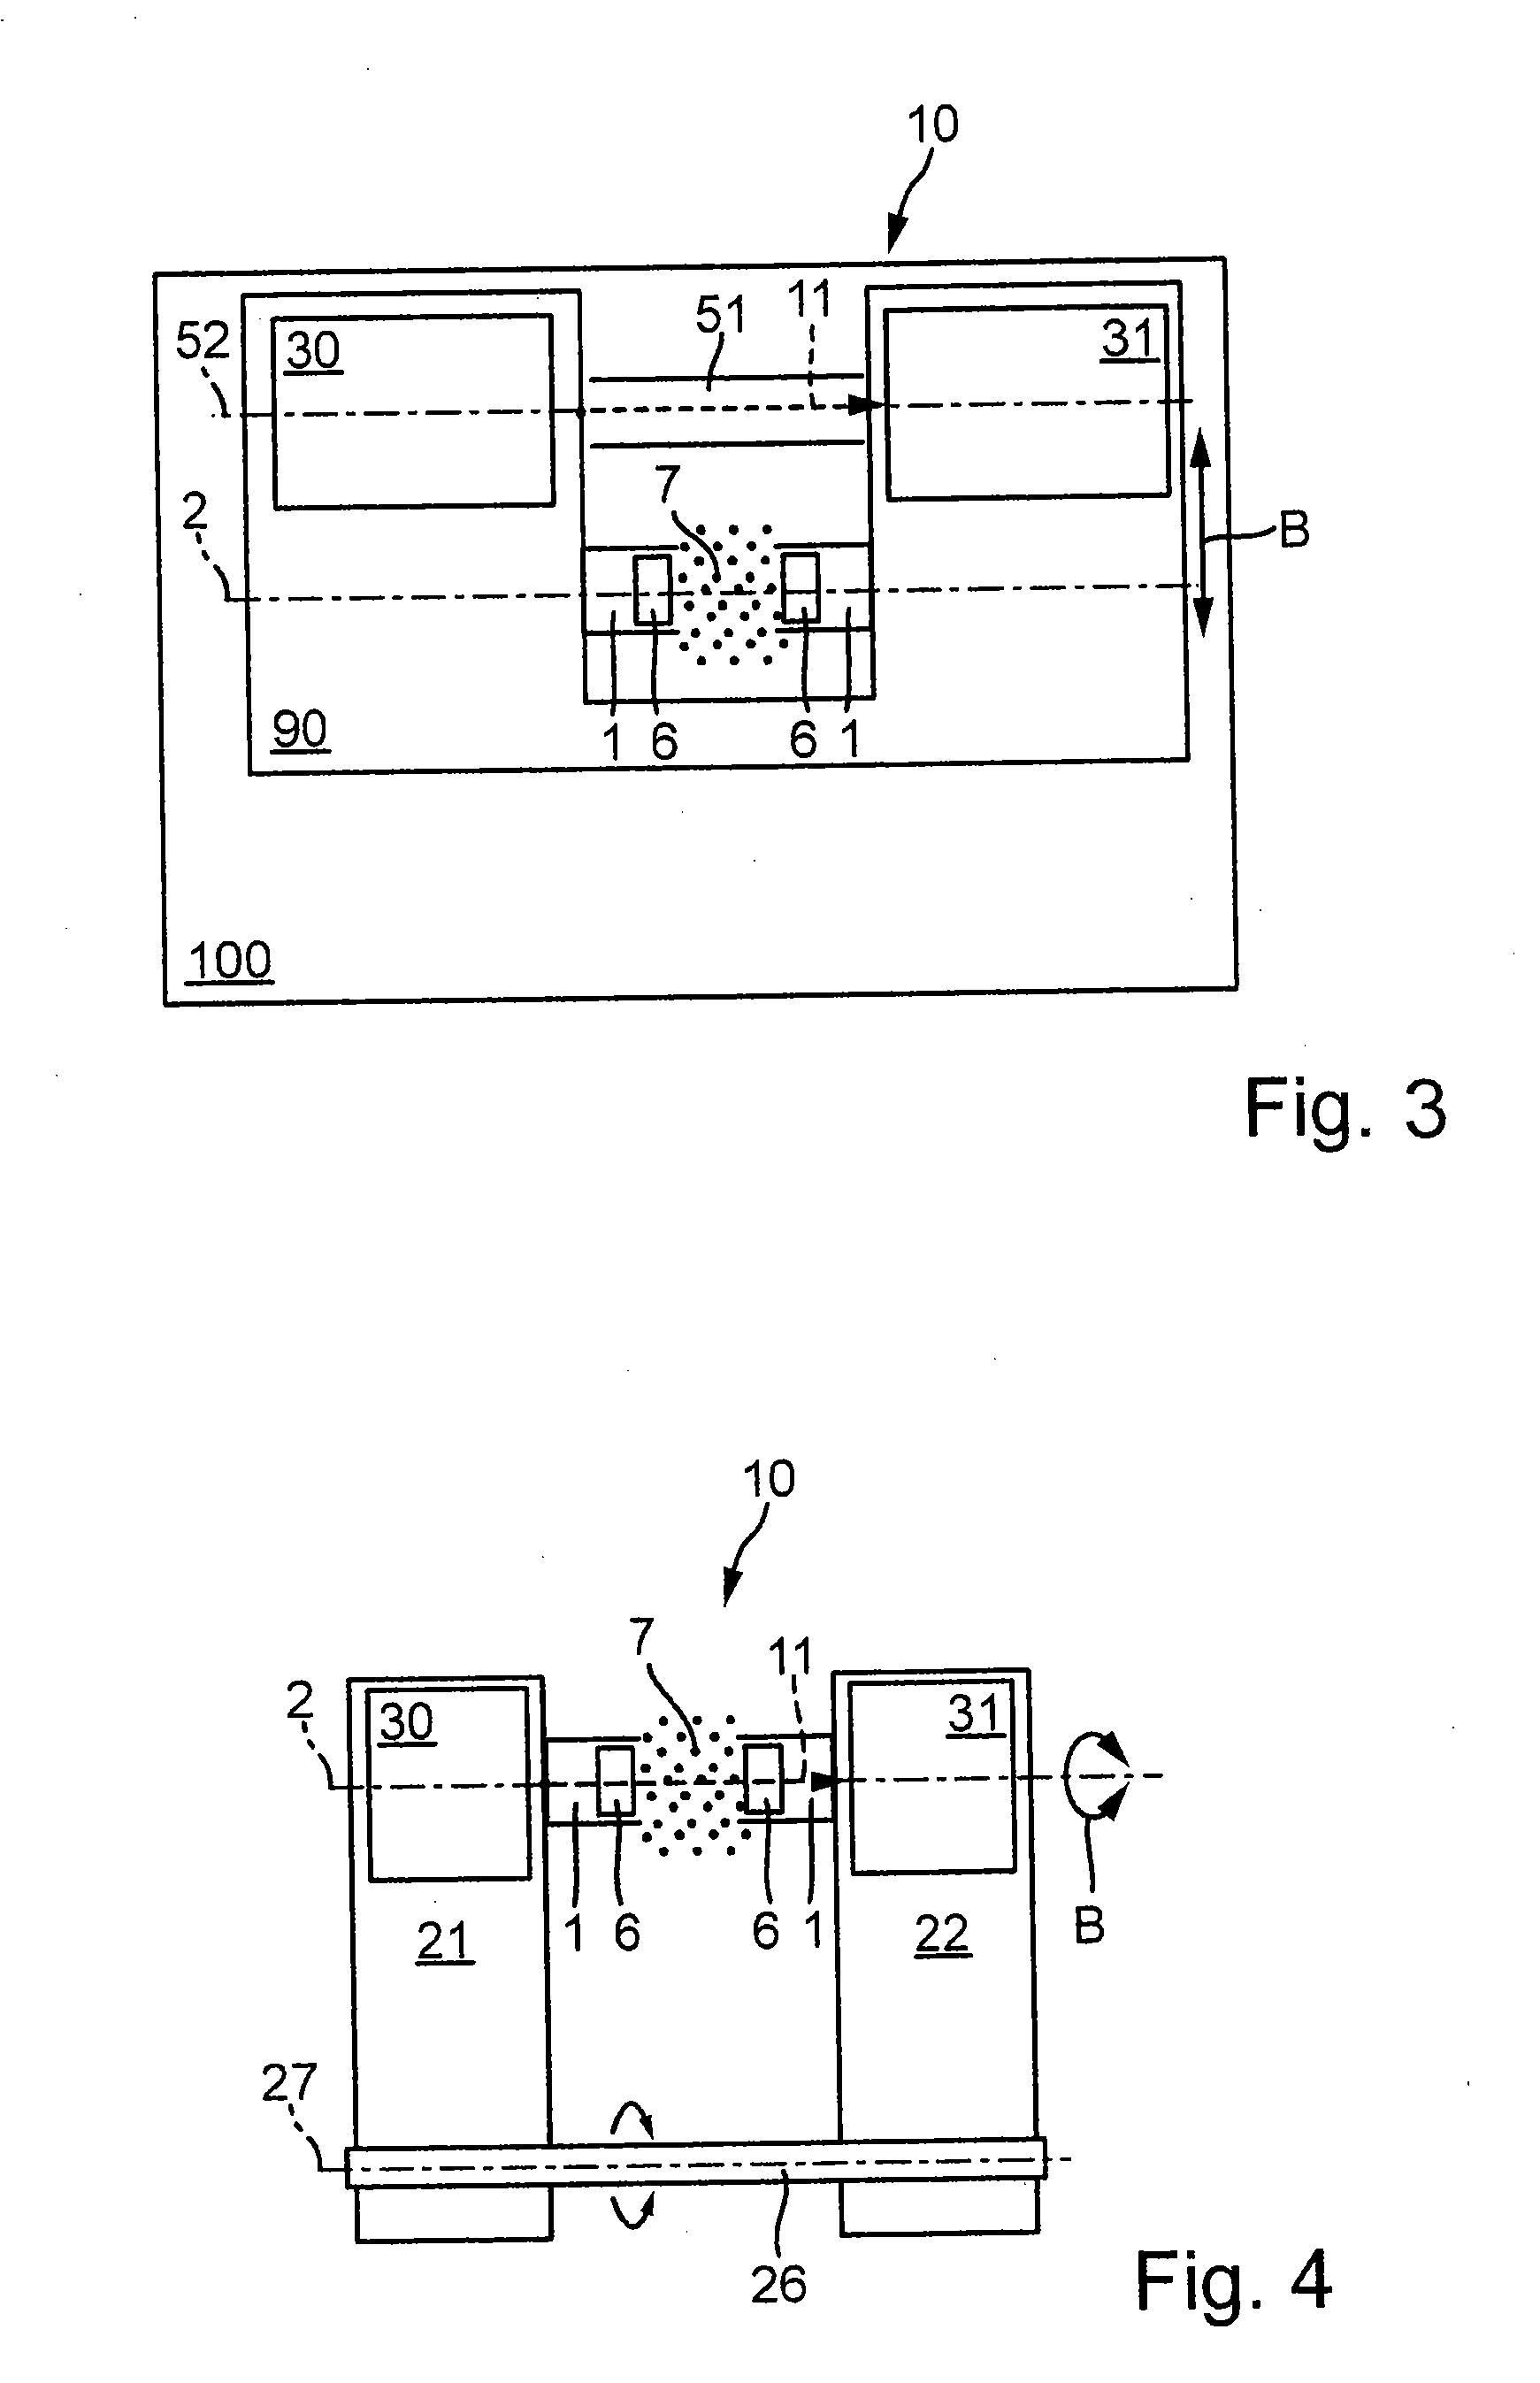 System for measuring properties of test samples in fluid